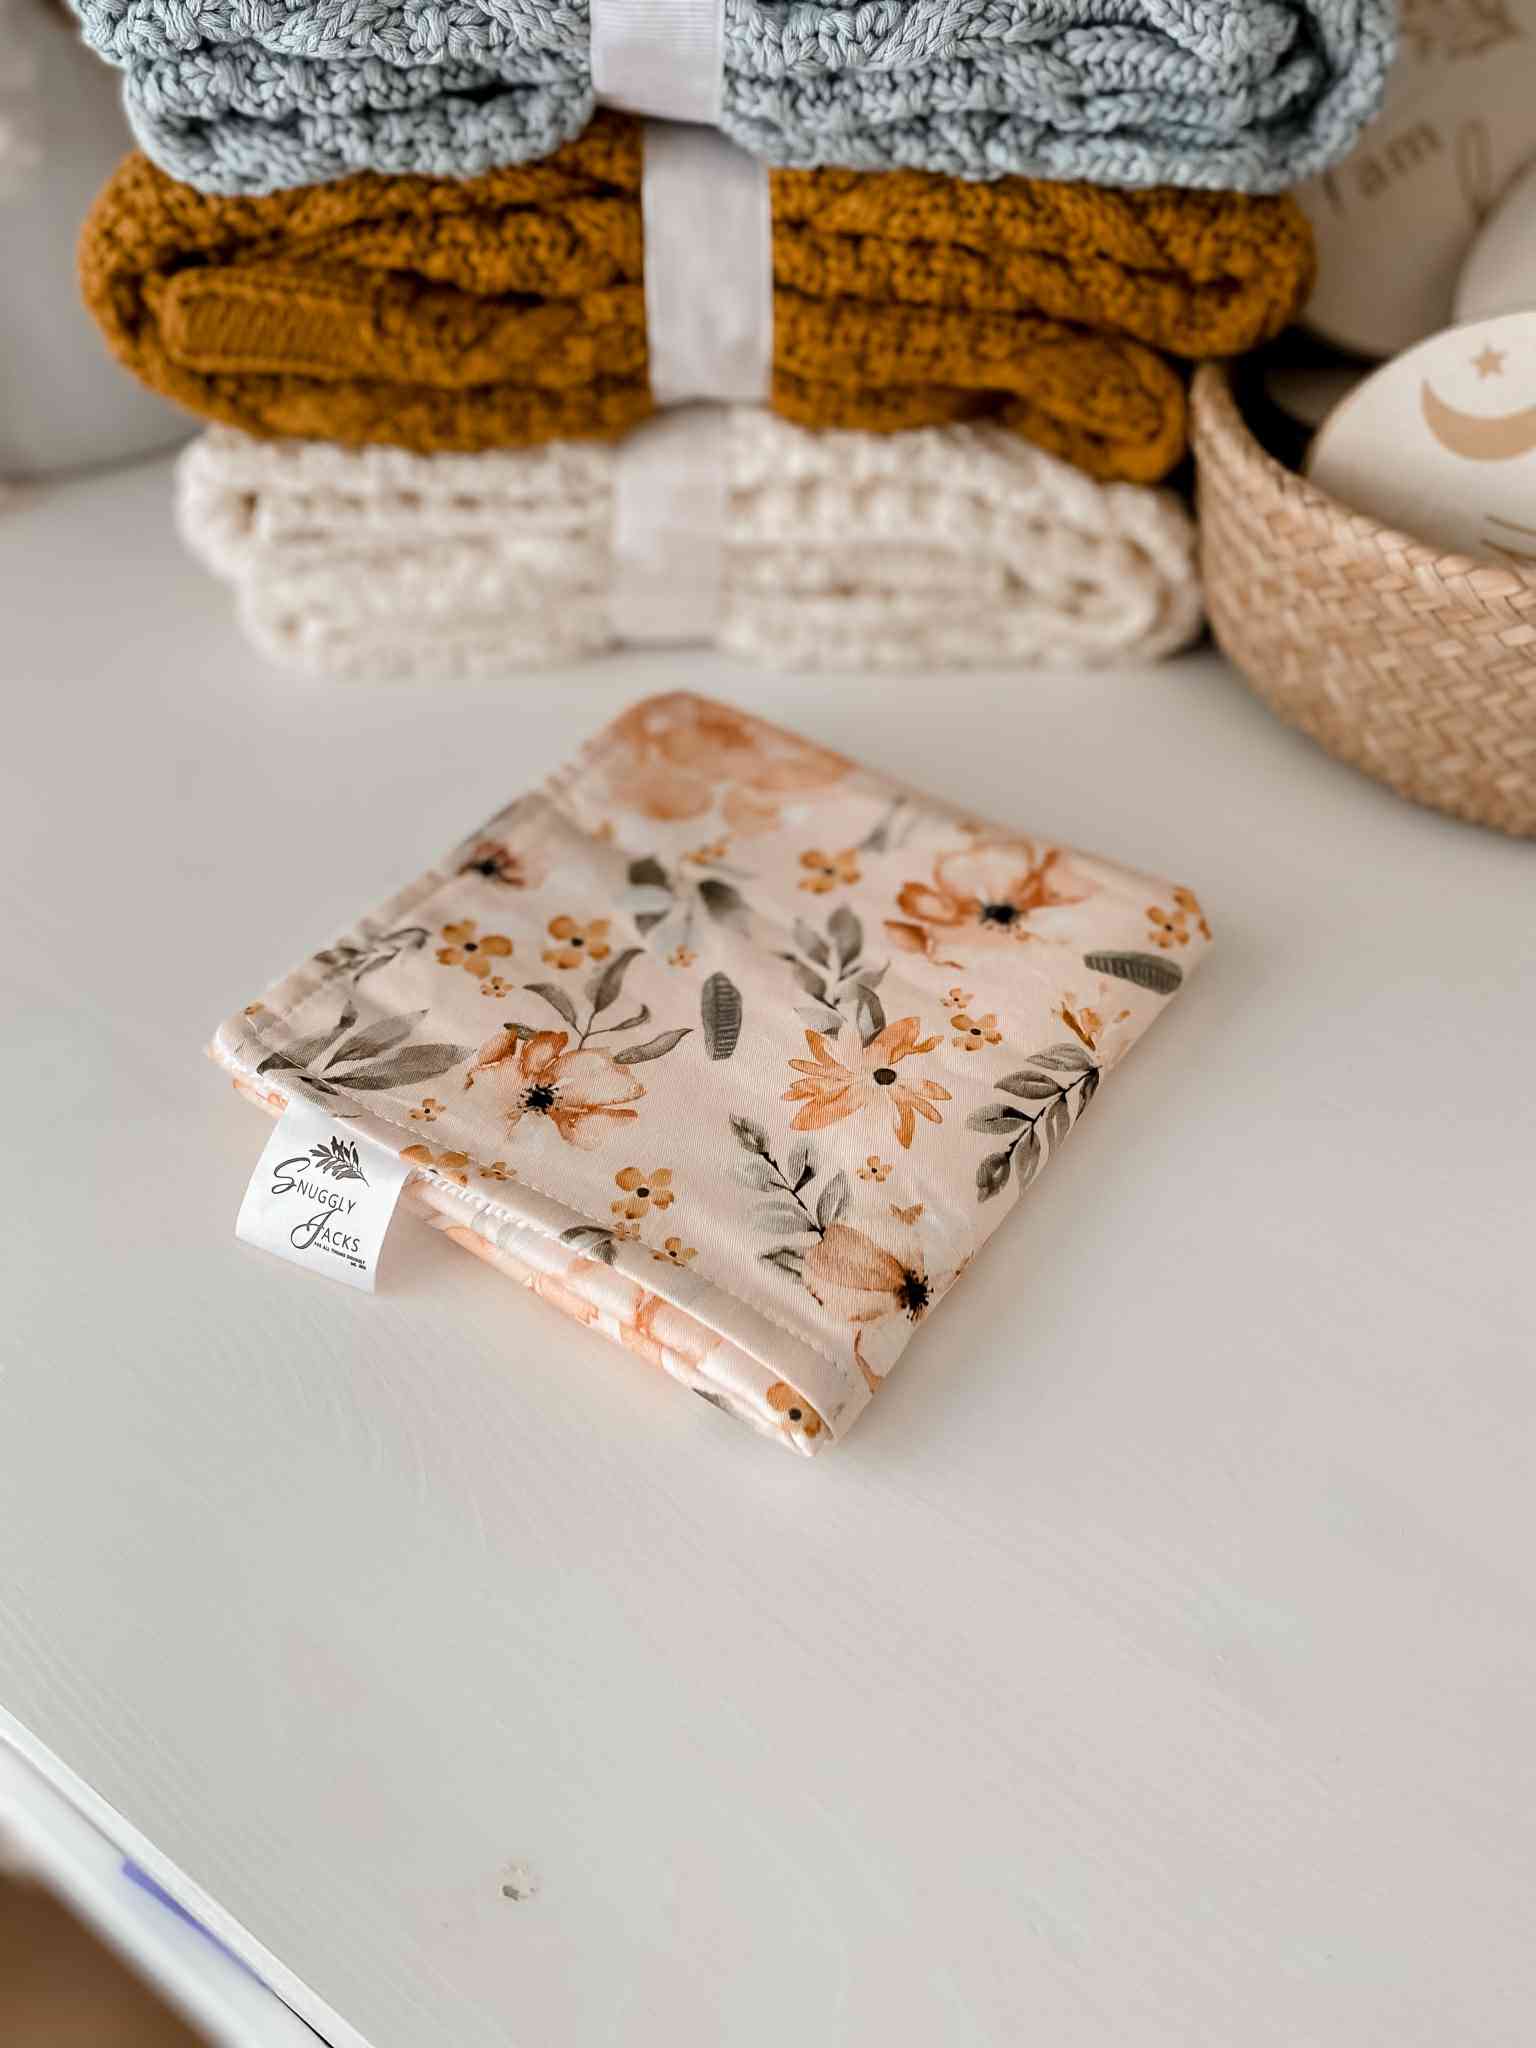 Honey, Cream and Cornflower Blue Knitted Blankets beside a Burp cloth with a soft floral print located in Canada